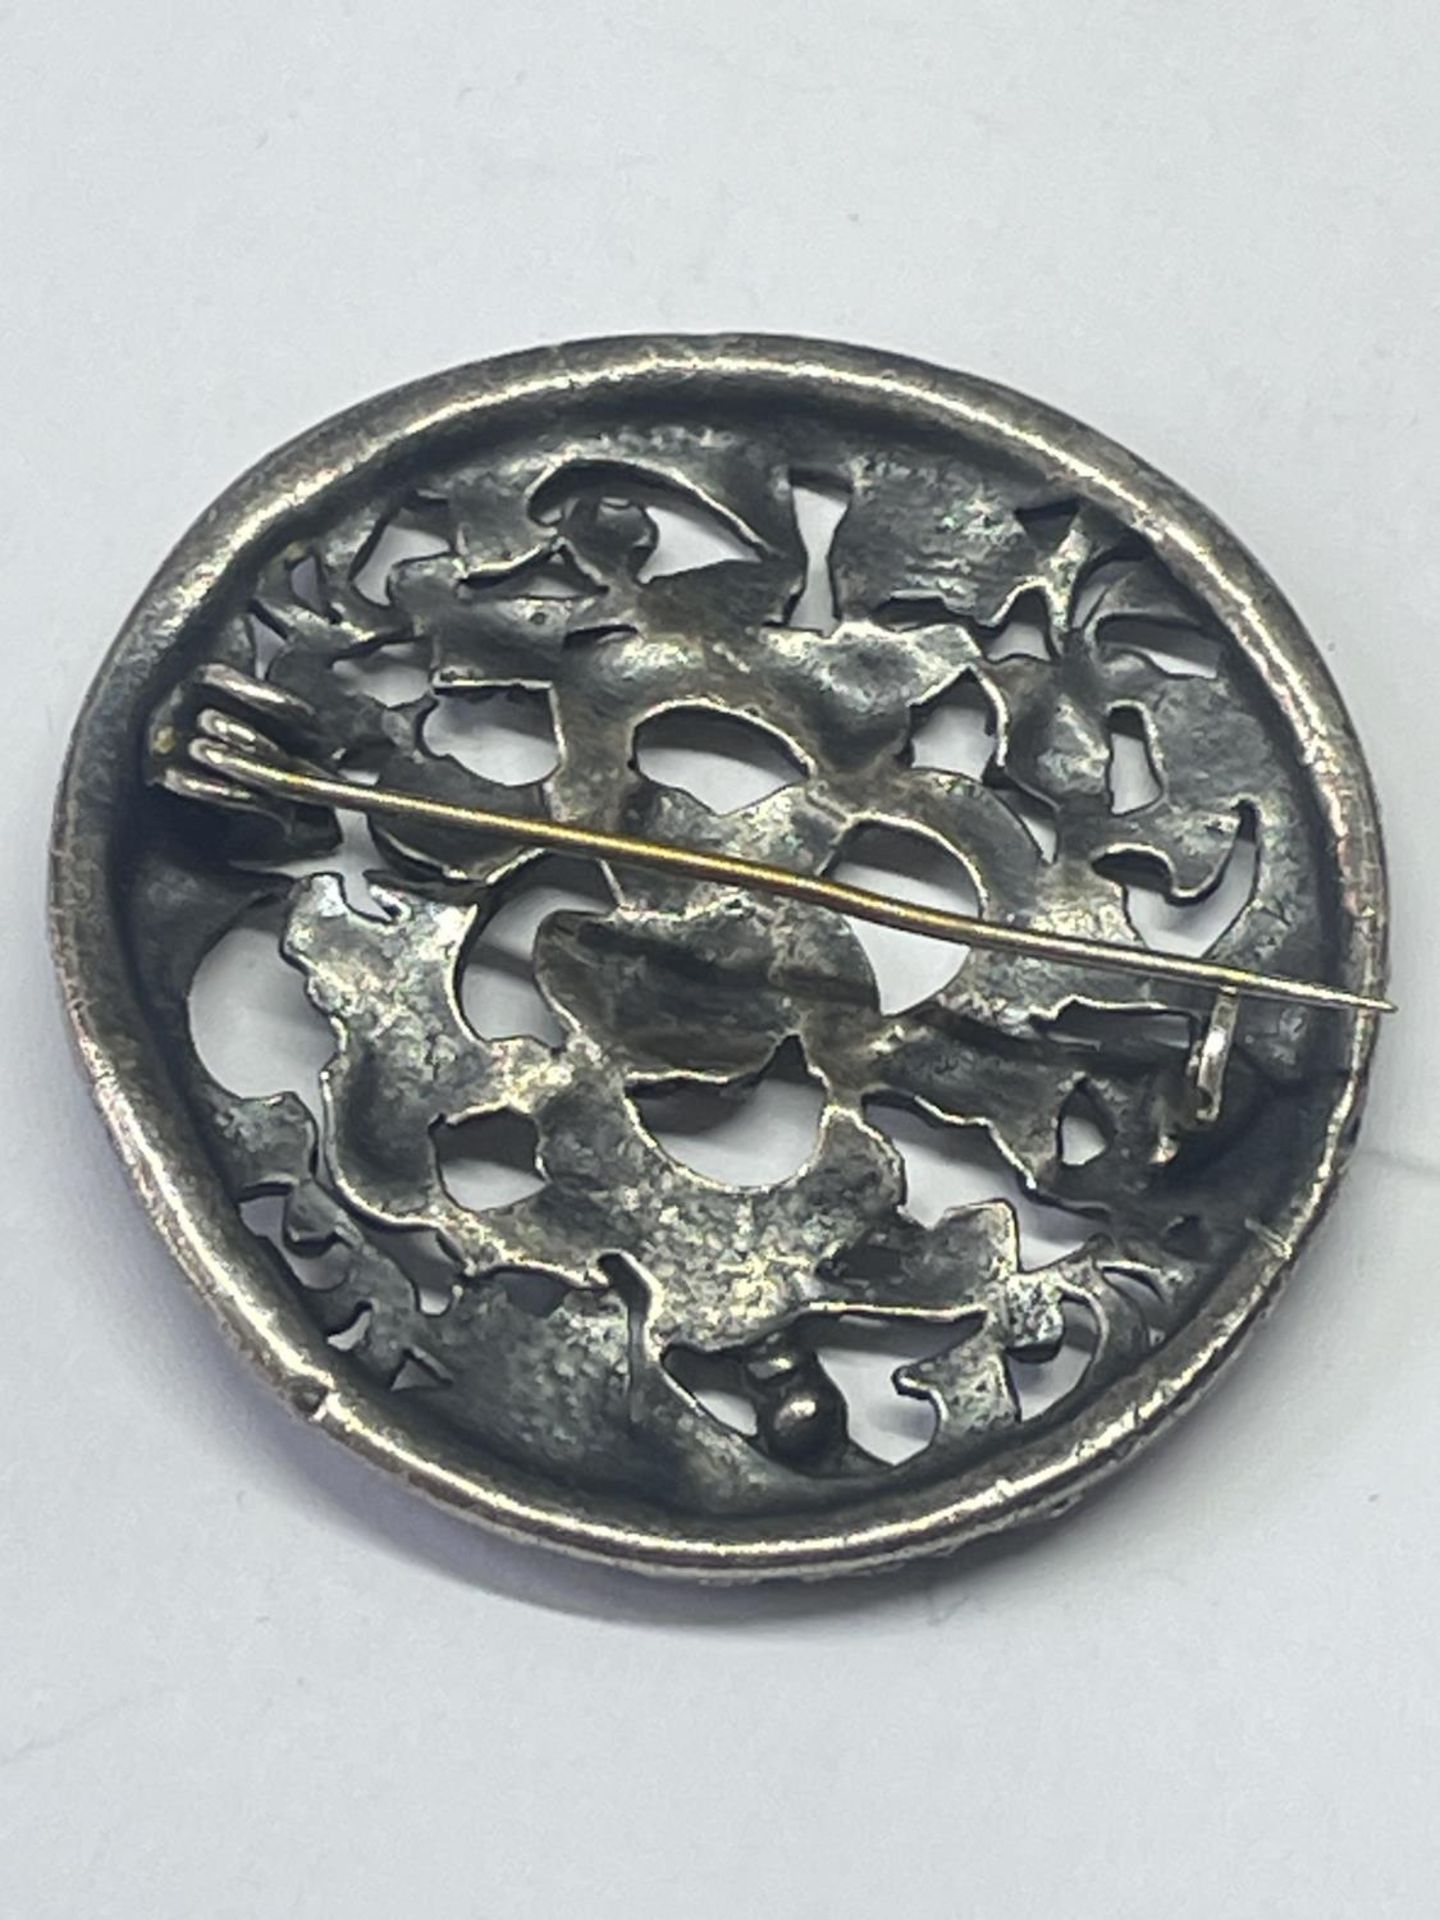 A SILVER BROOCH IN A PRESENTATION BOX - Image 3 of 3